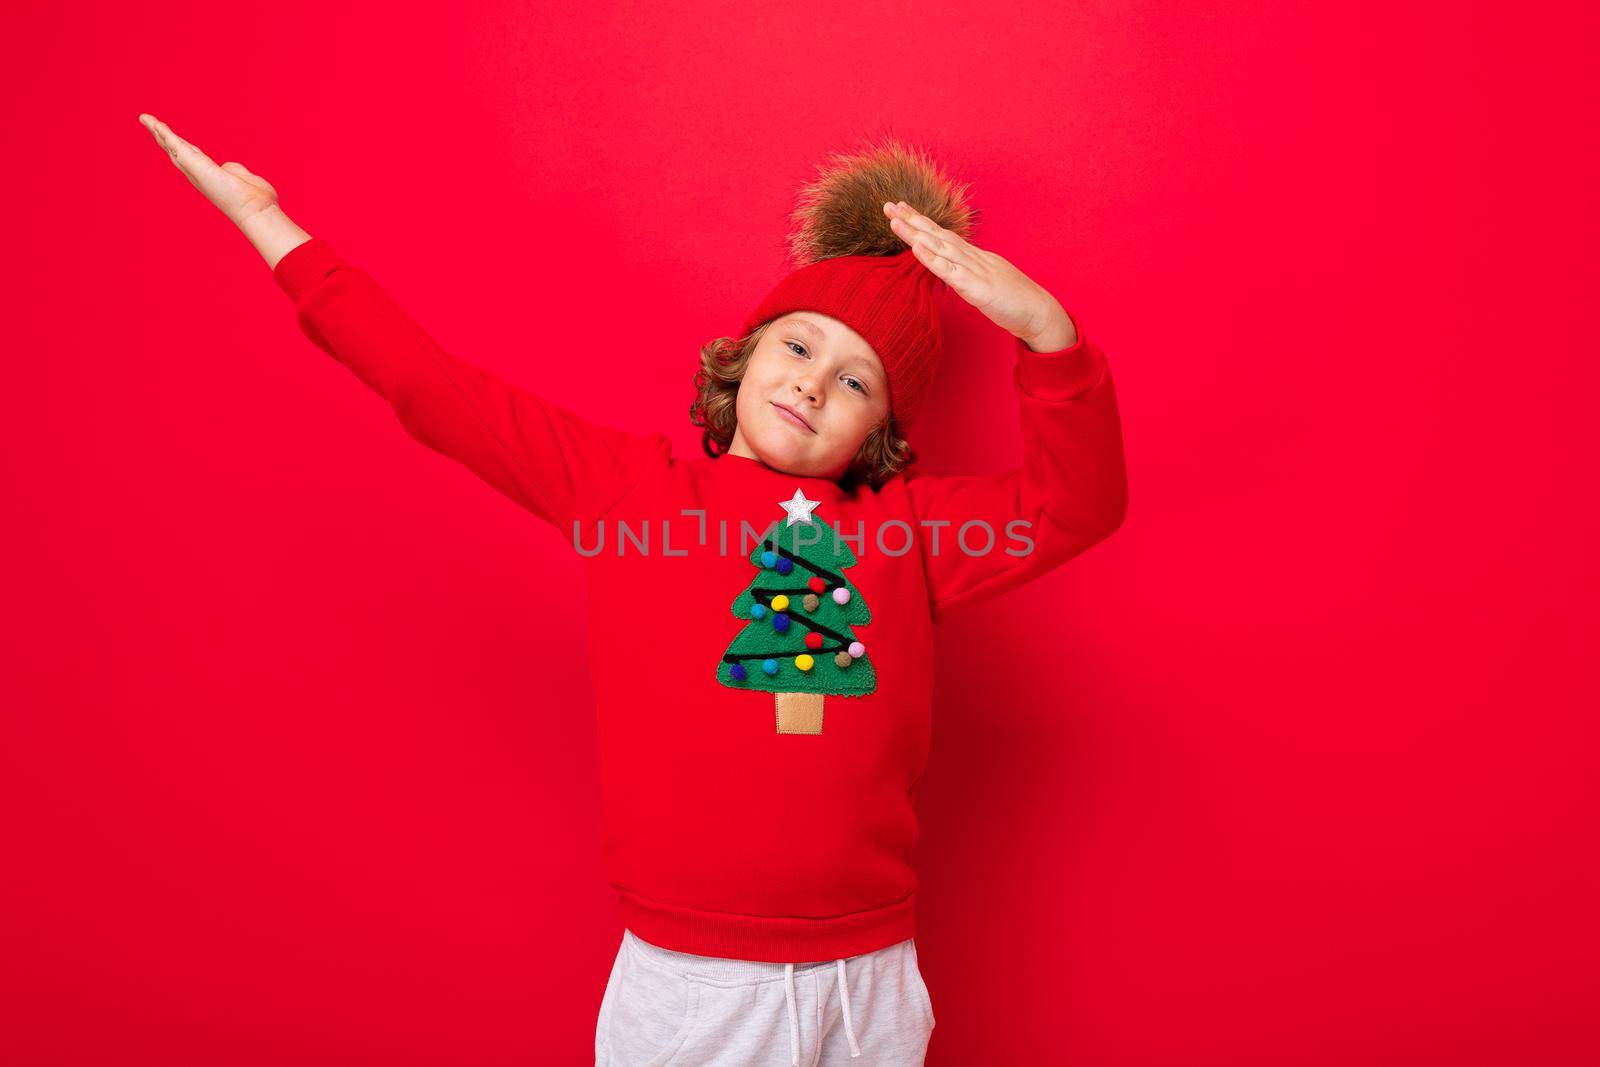 cute blond boy in warm hat and christmas sweater on red background with smile on his face.